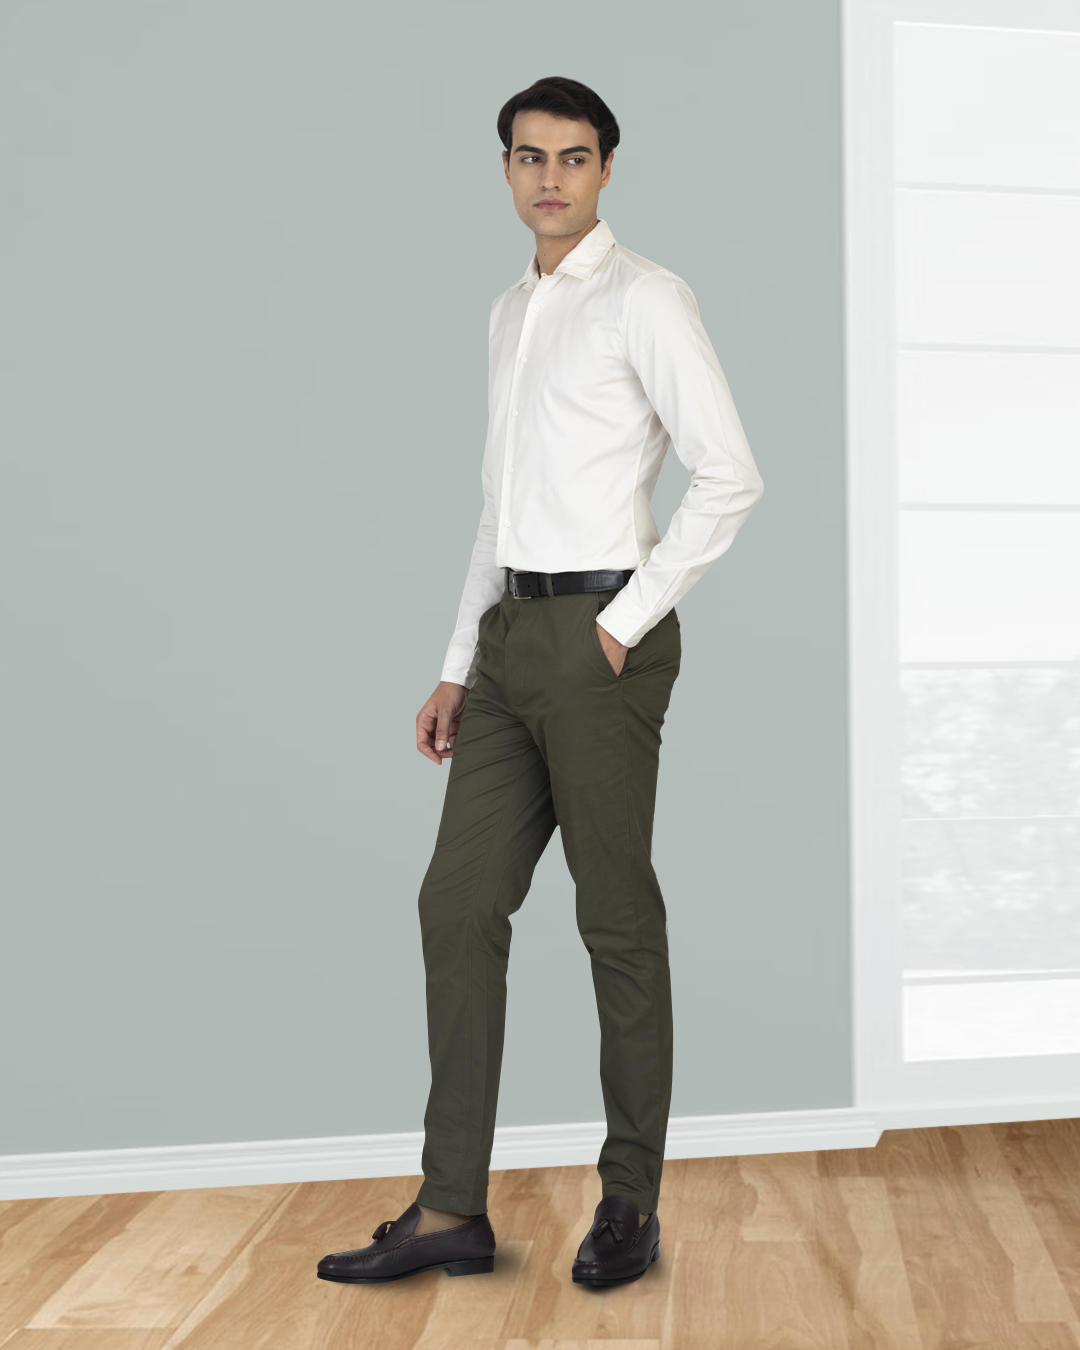 Model wearing custom Genoa Chino pants for men by Luxire in olive green hand in pocket